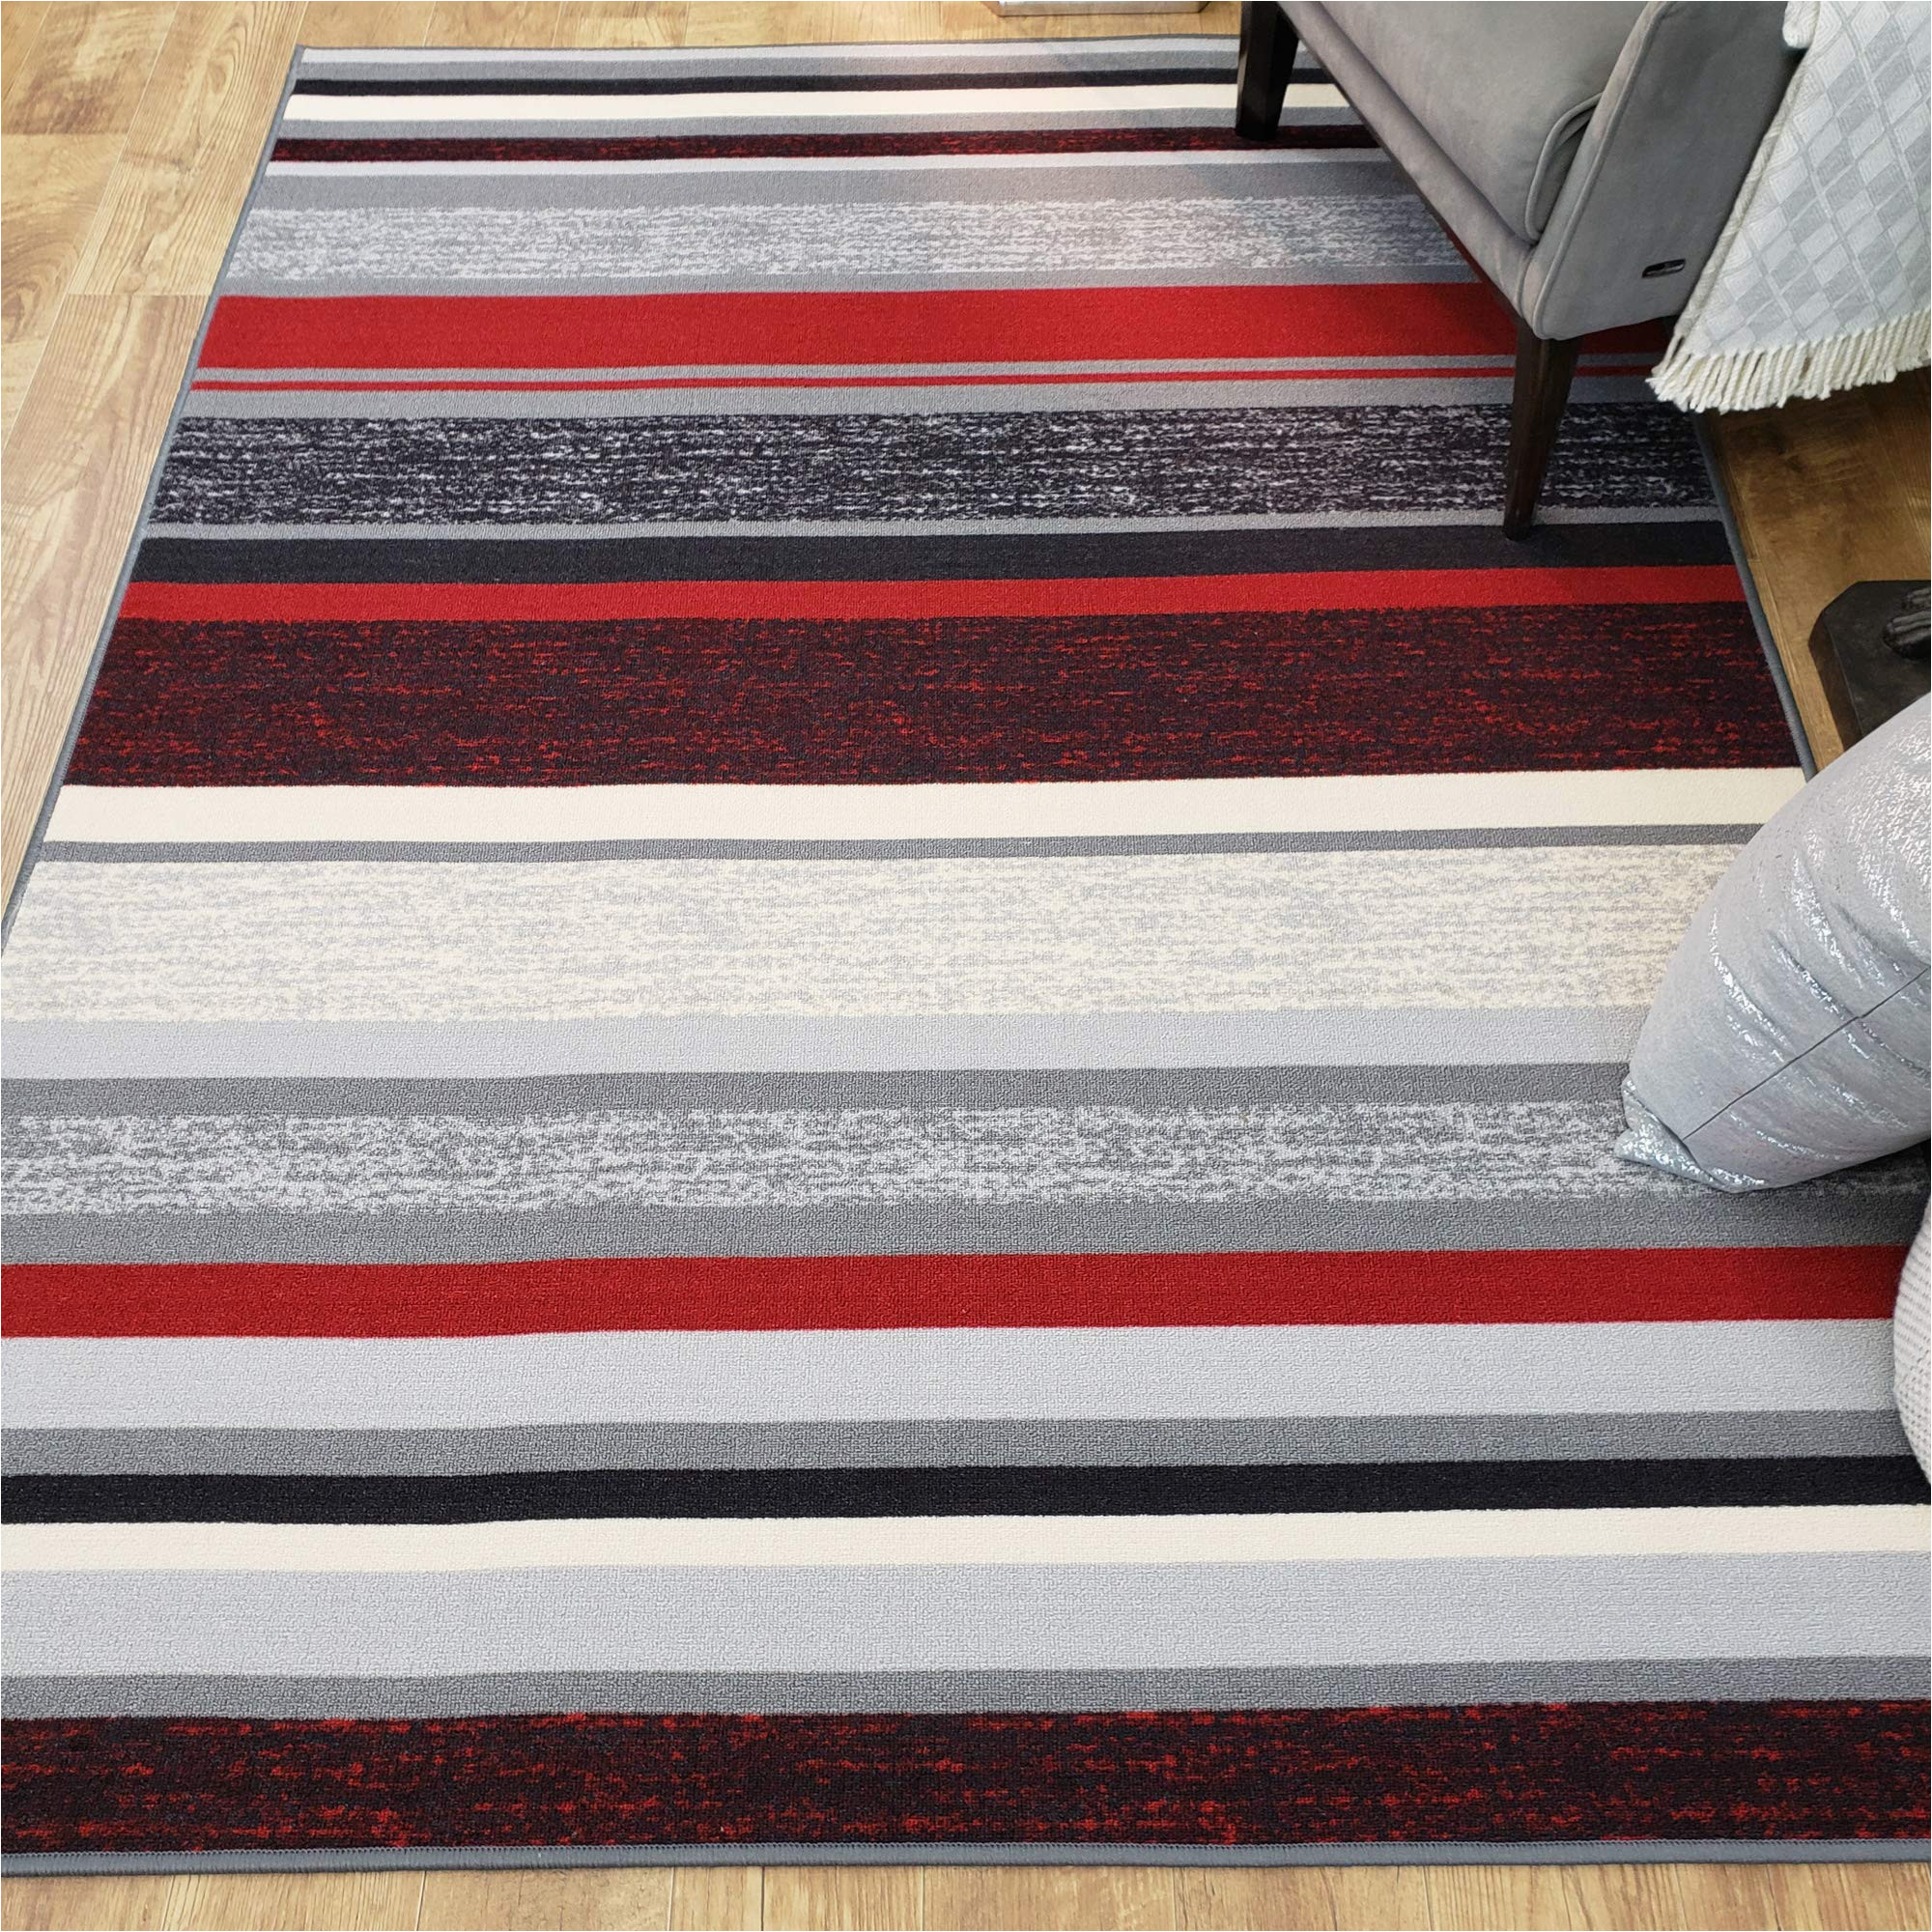 Anne Gray True Red area Rug Rubber Backed area Rug, 39 X 58 Inch (fits 3×5 area), Red Gray Striped, Non Slip, Kitchen Rugs and Mats